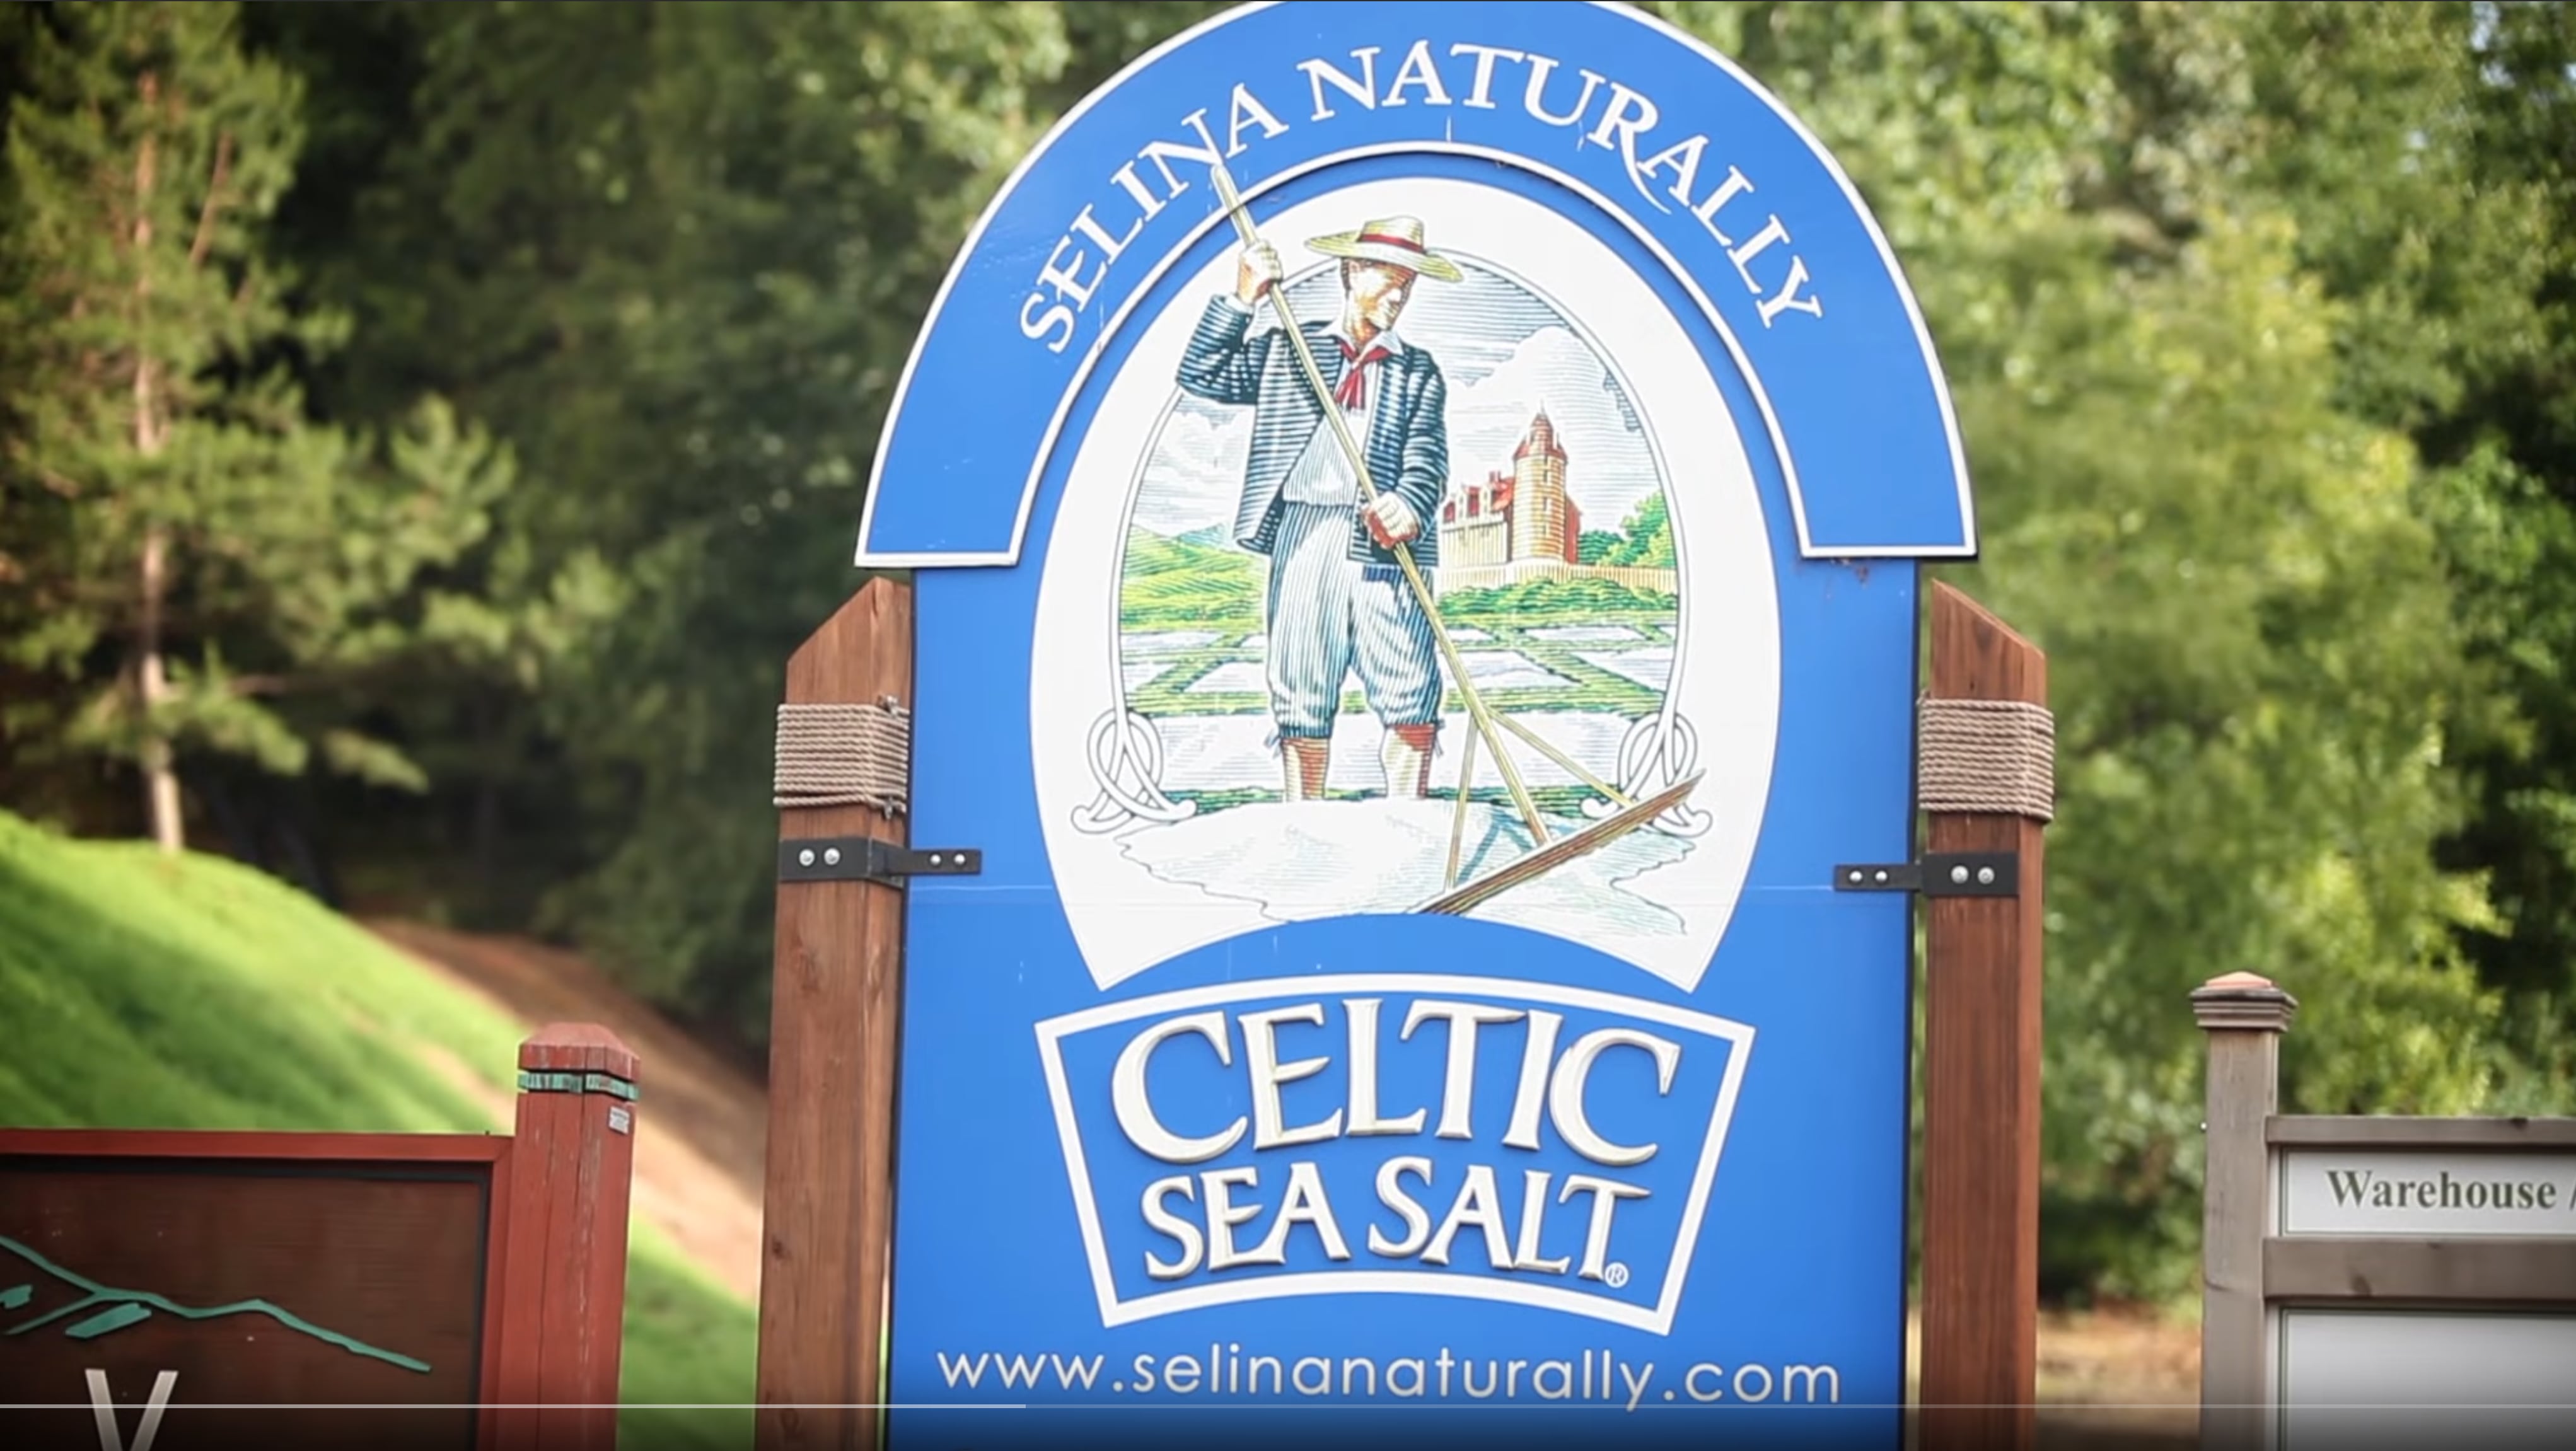 Celtic Sea Salt products » Compare prices and see offers now